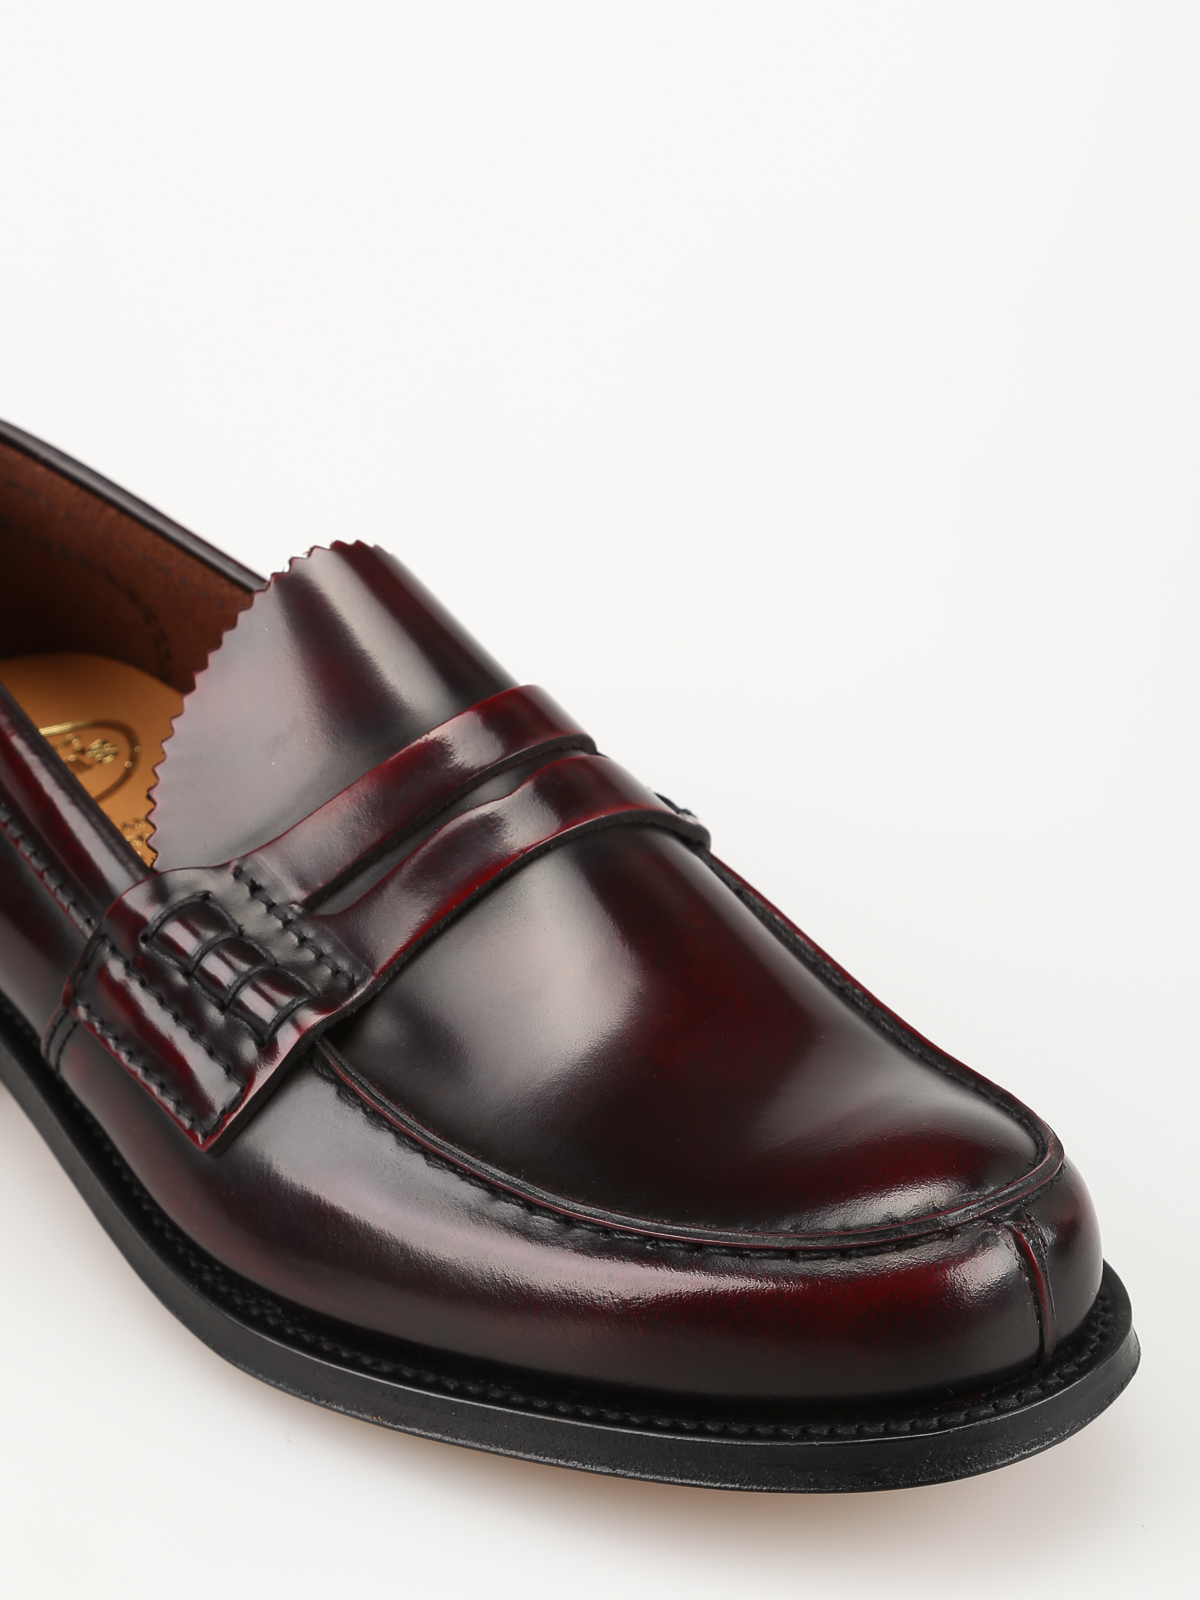 Loafers & Slippers Church's - Tunbridge burgundy leather loafers 